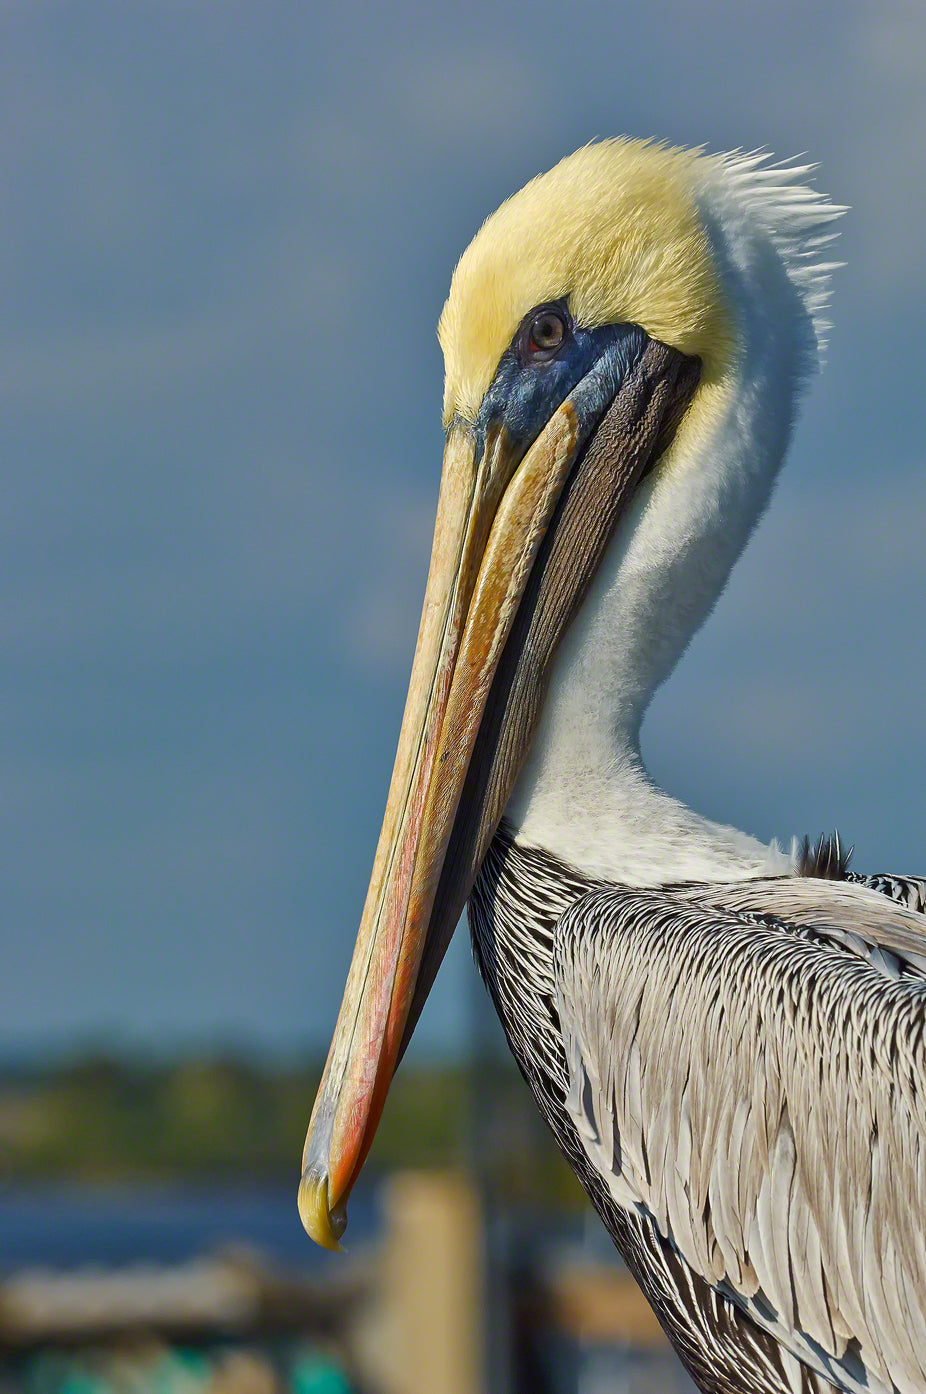 A photograph by Mike Ring of a Brown Pelican